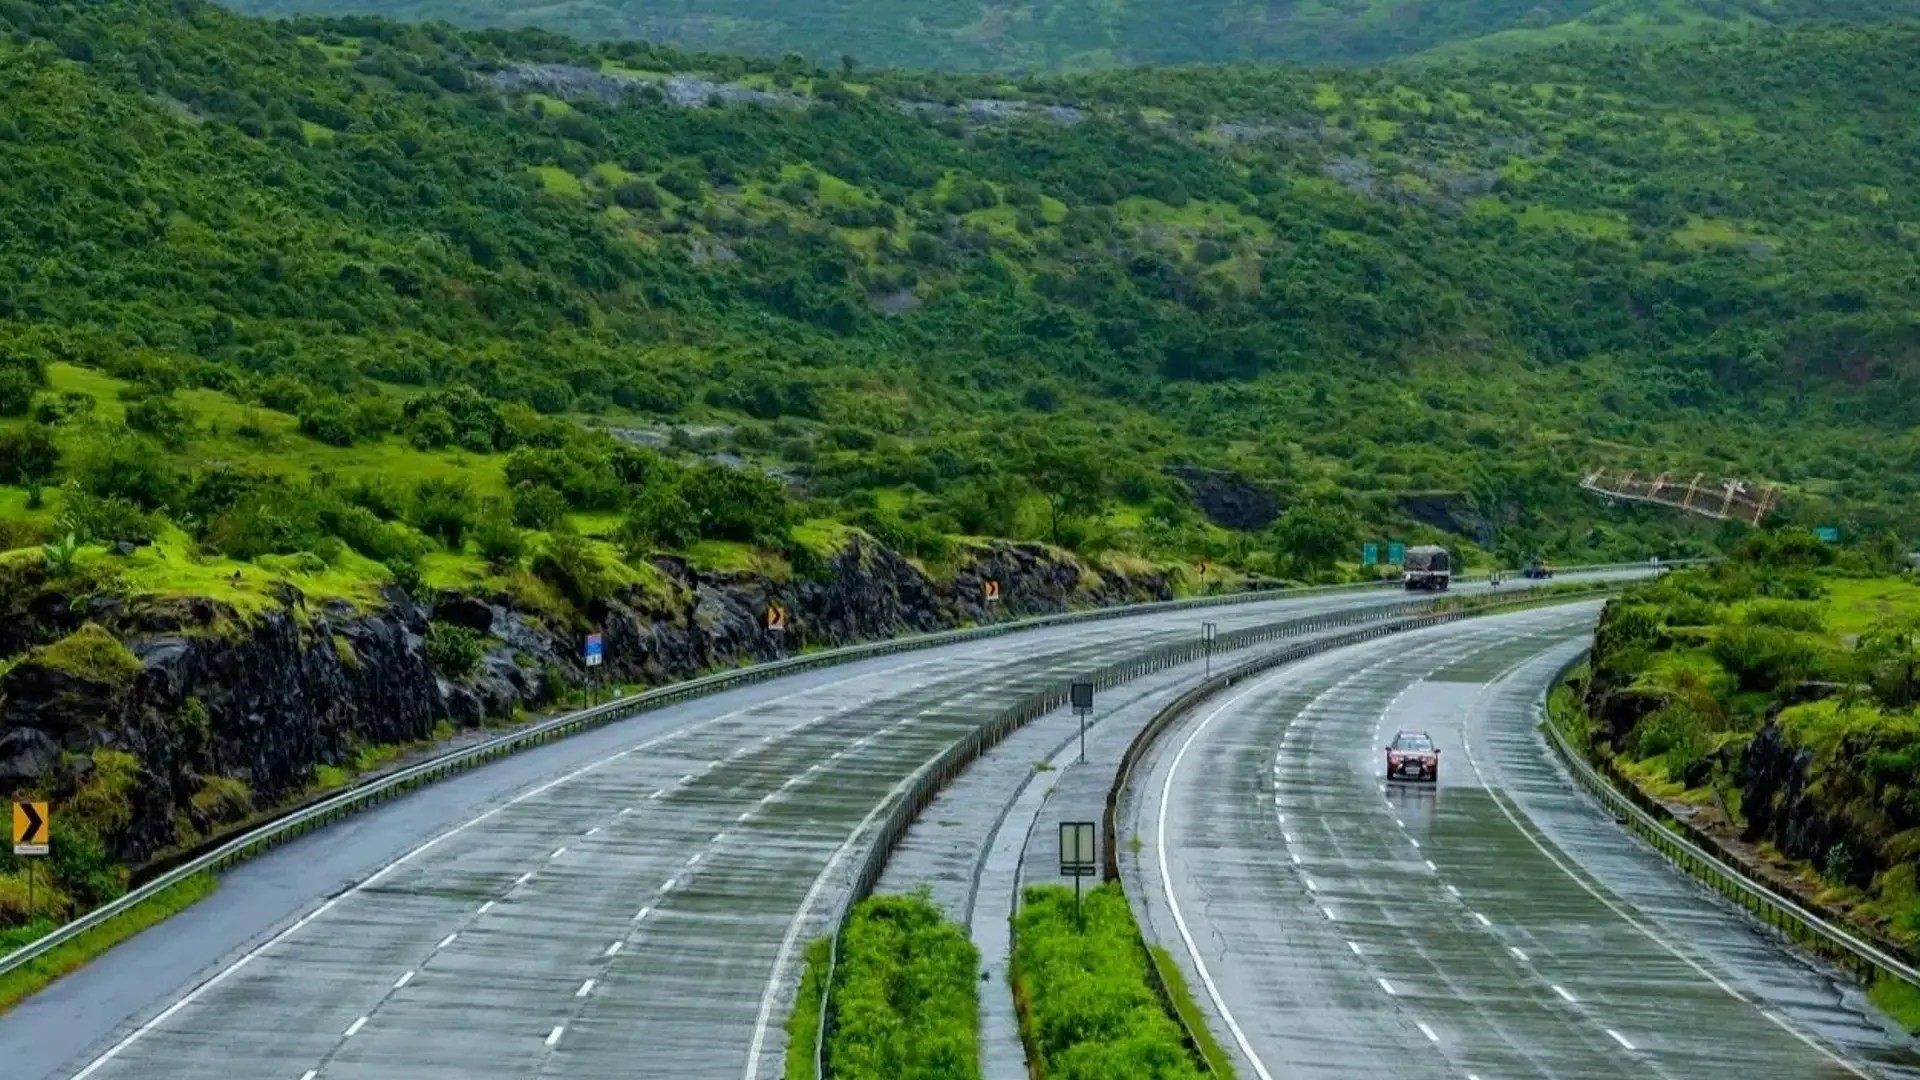 The Ministry of Road Transport and Highways (MoRTH) has allocated ₹6,728.33 crore for the construction of eight segments, totaling 305.50 km along NH-913 in Arunachal Pradesh.